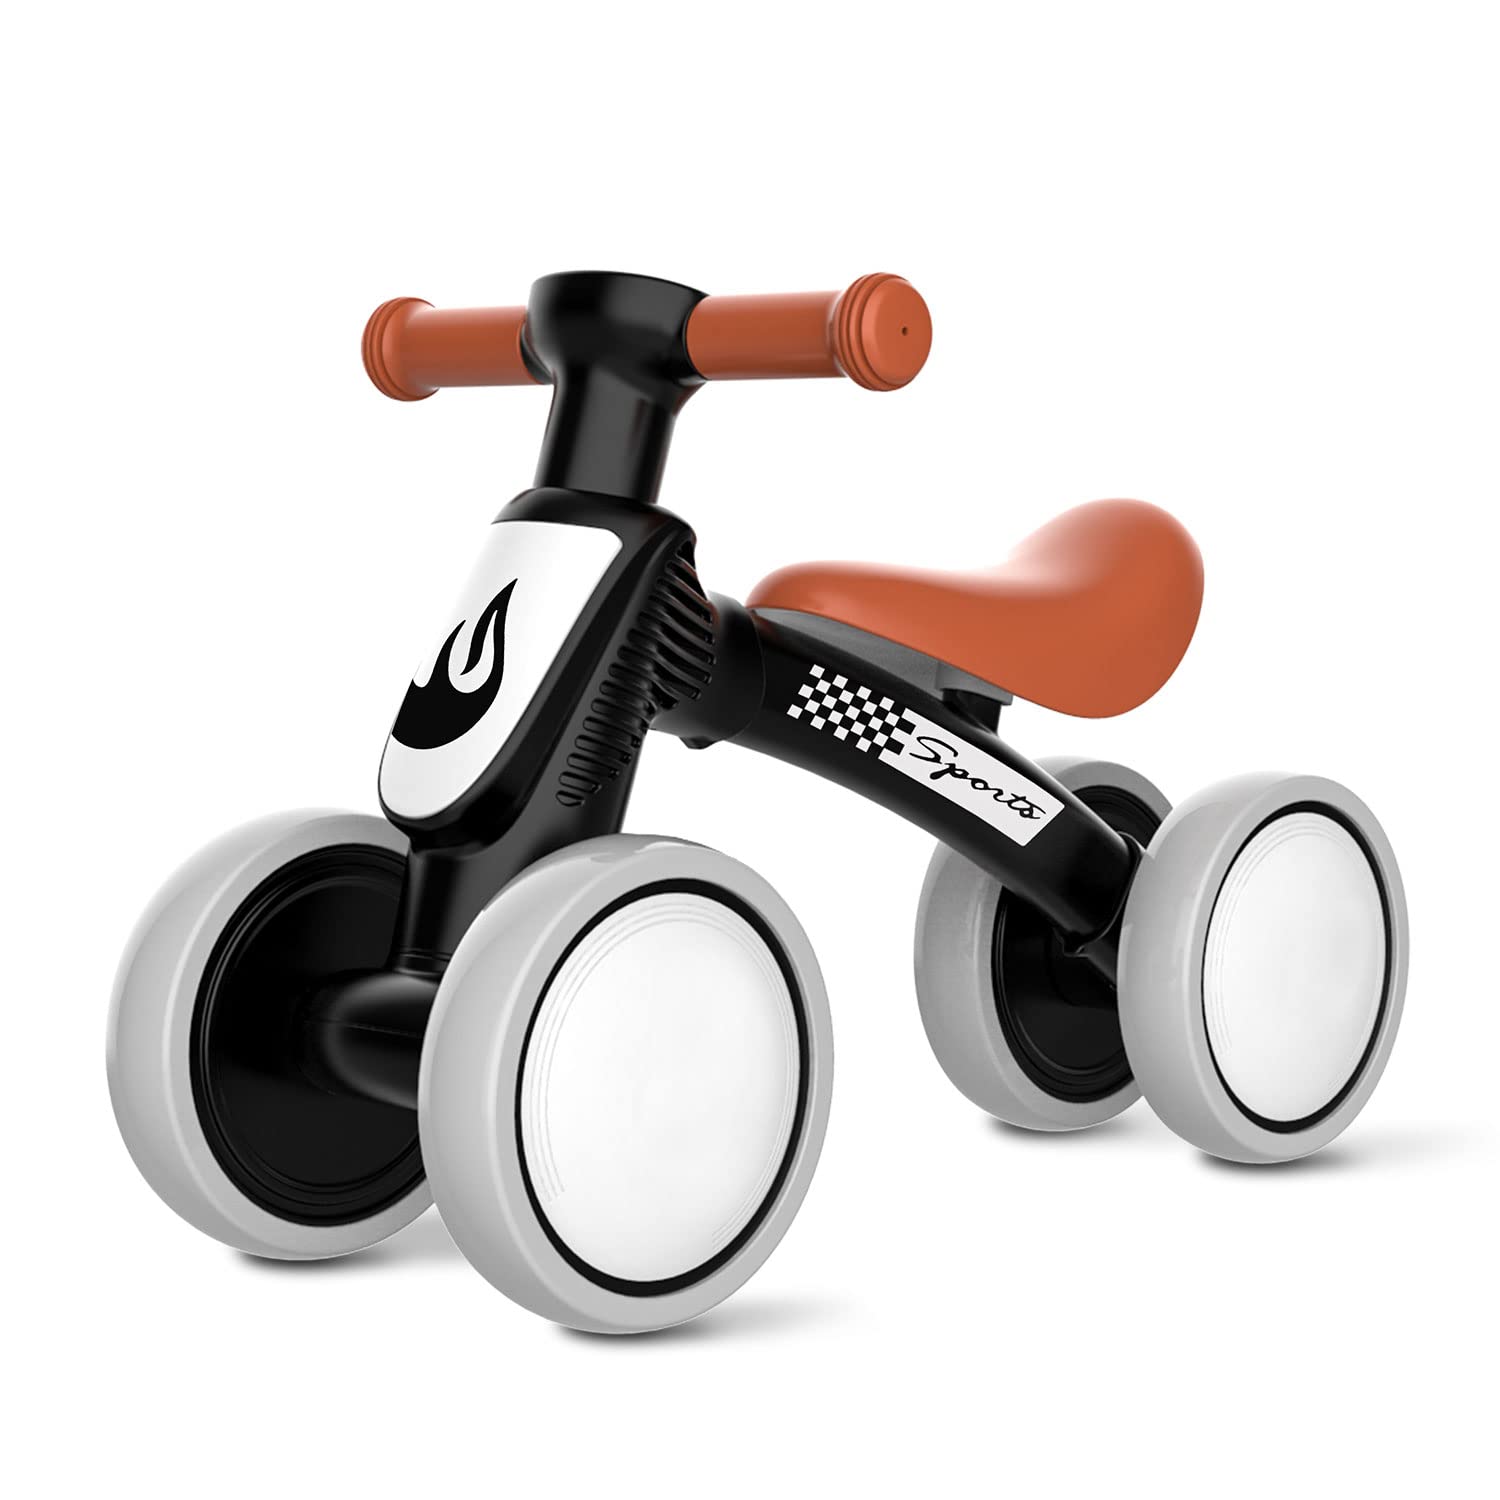 Baby Balance Bike Toys for 1 Year Old Boy Gifts, 10-36 Month Toddler Balance Bike, No Pedal 4 Silence Wheels & Soft Seat Pre-School First Riding Toys, 1st Birthday Gifts.